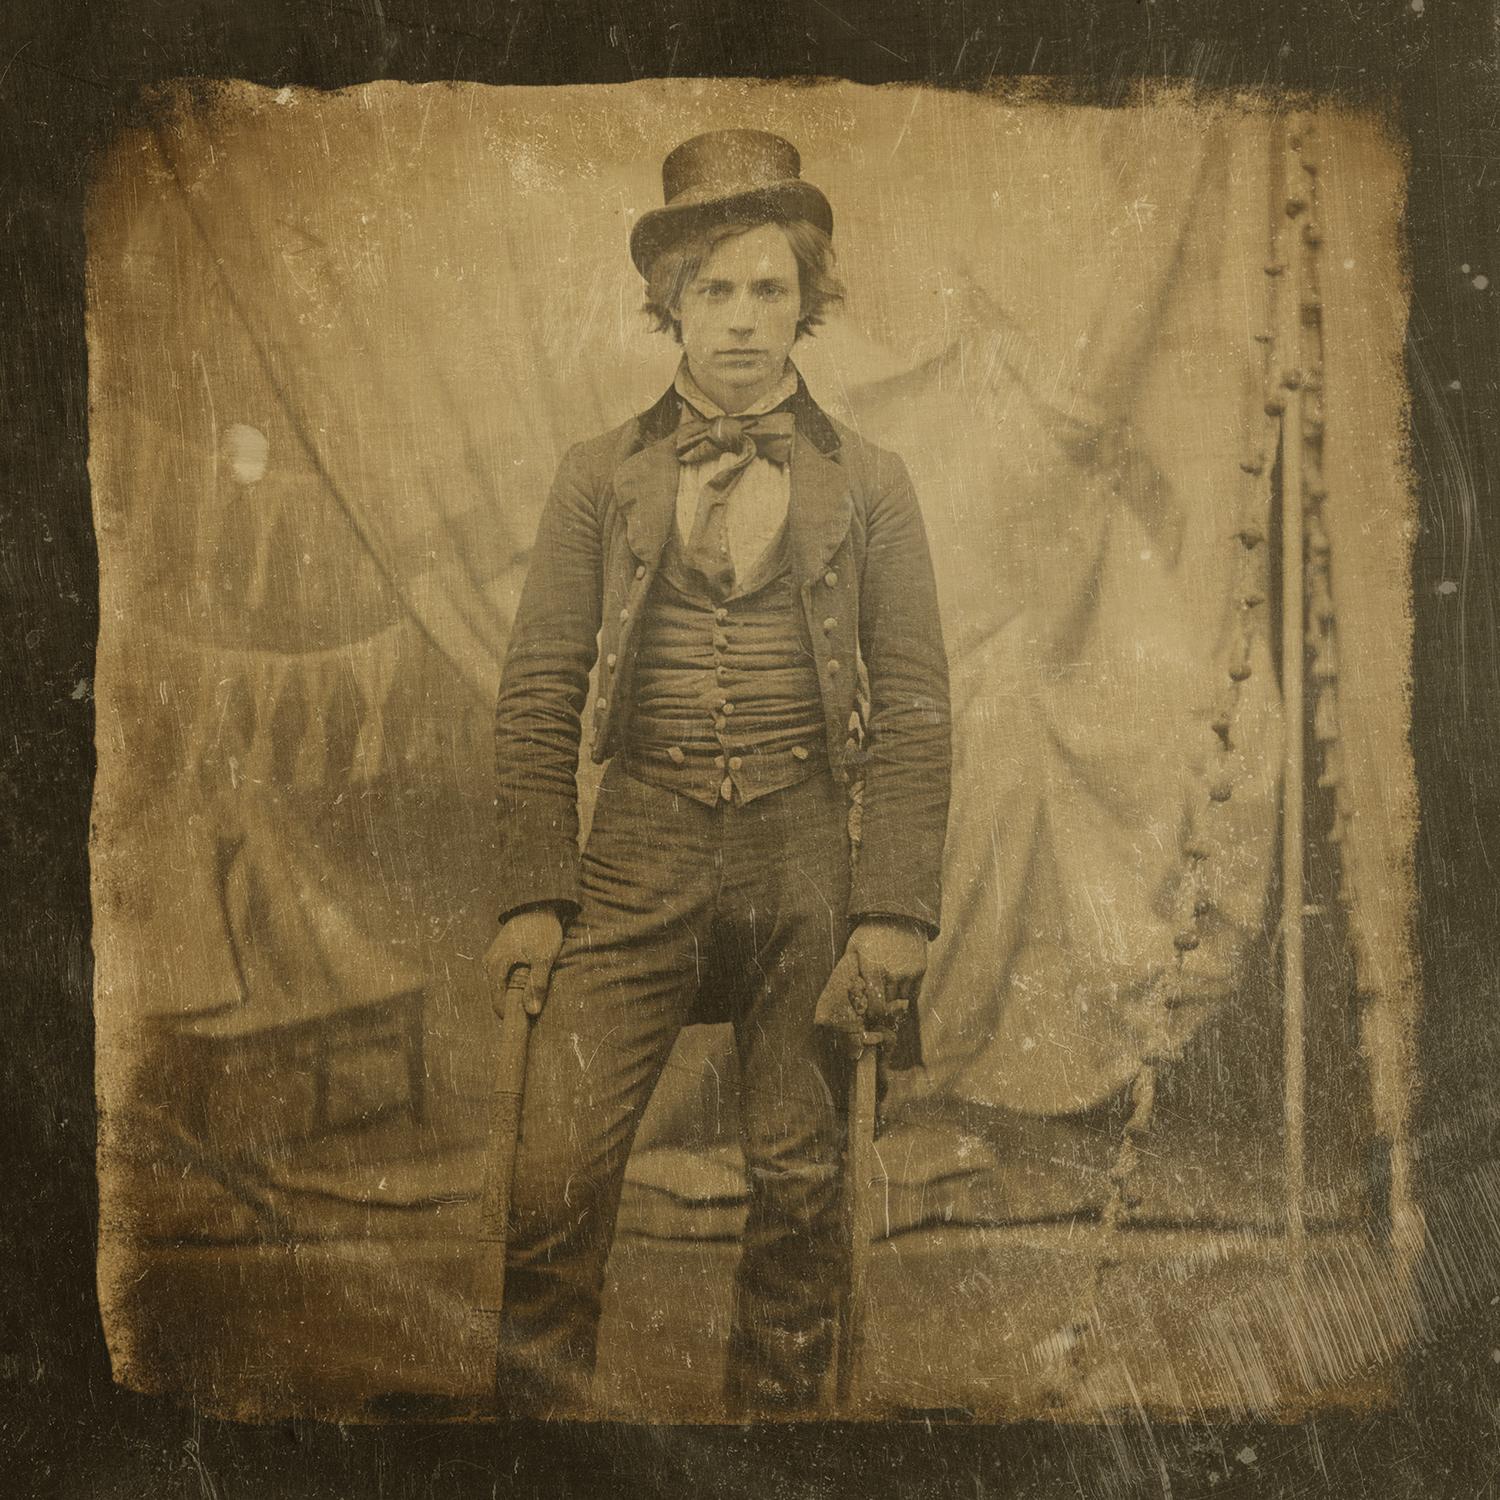 Carnival worker -exotic daguerreotype reproduction Framed - Photograph by FPA Francis Pavy Artist